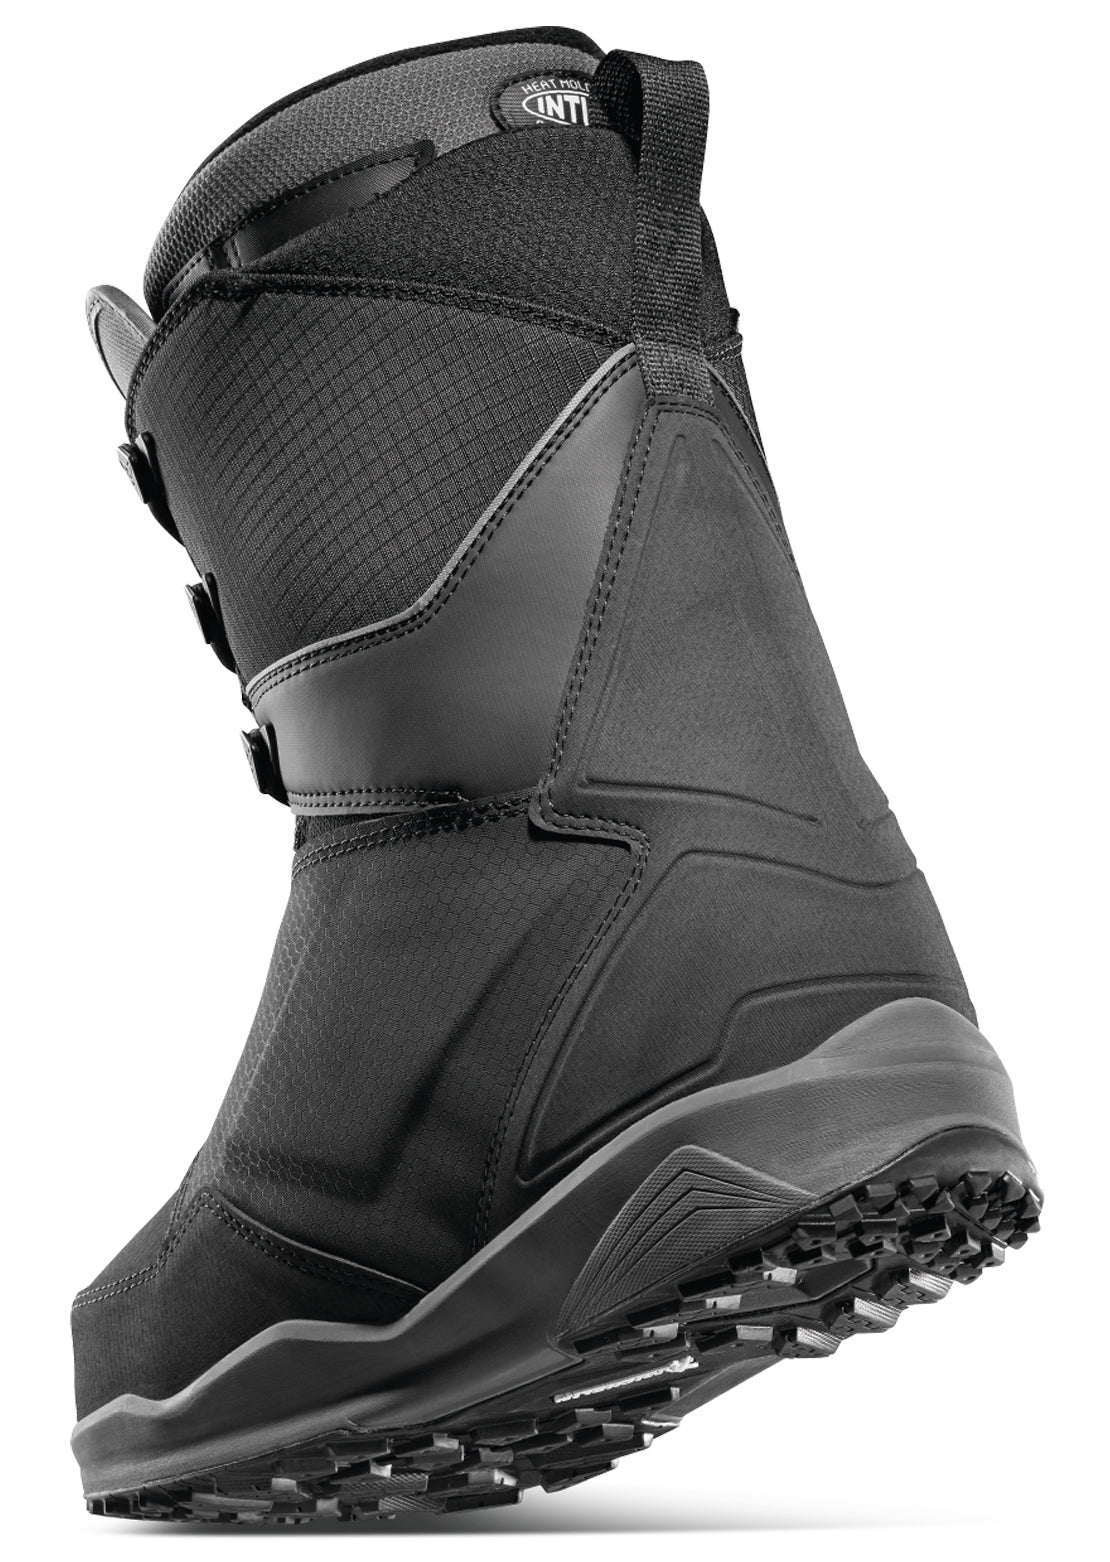 32 Men&#39;s Lashed Diggers Snowboard Boots Black/Grey/White